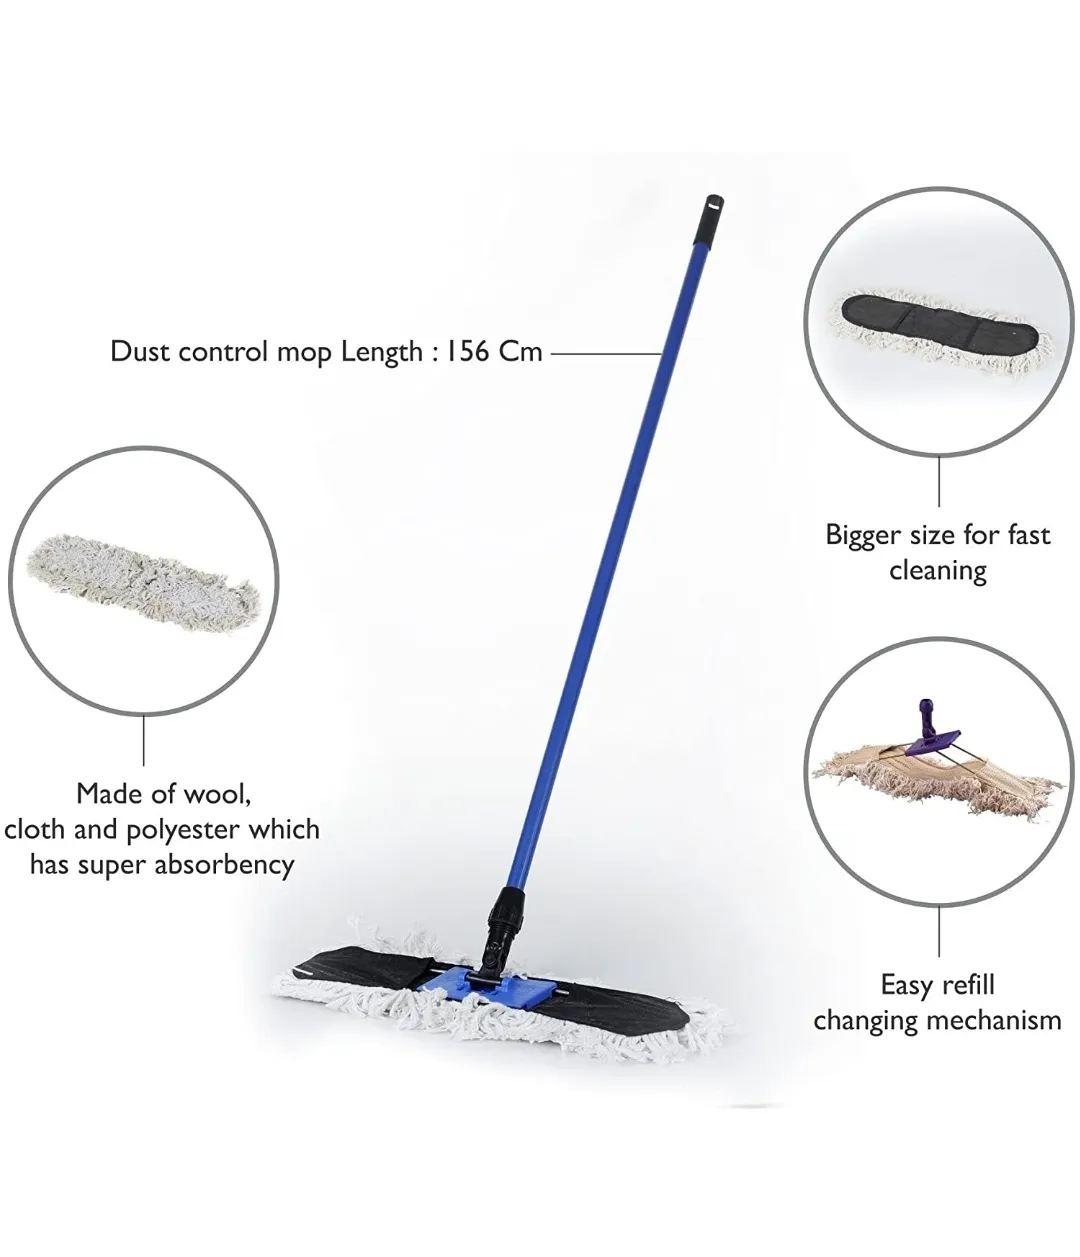 Gala Dust Control Mop No. 18, Flexible Moving Head, 360 Degree Cleaning System